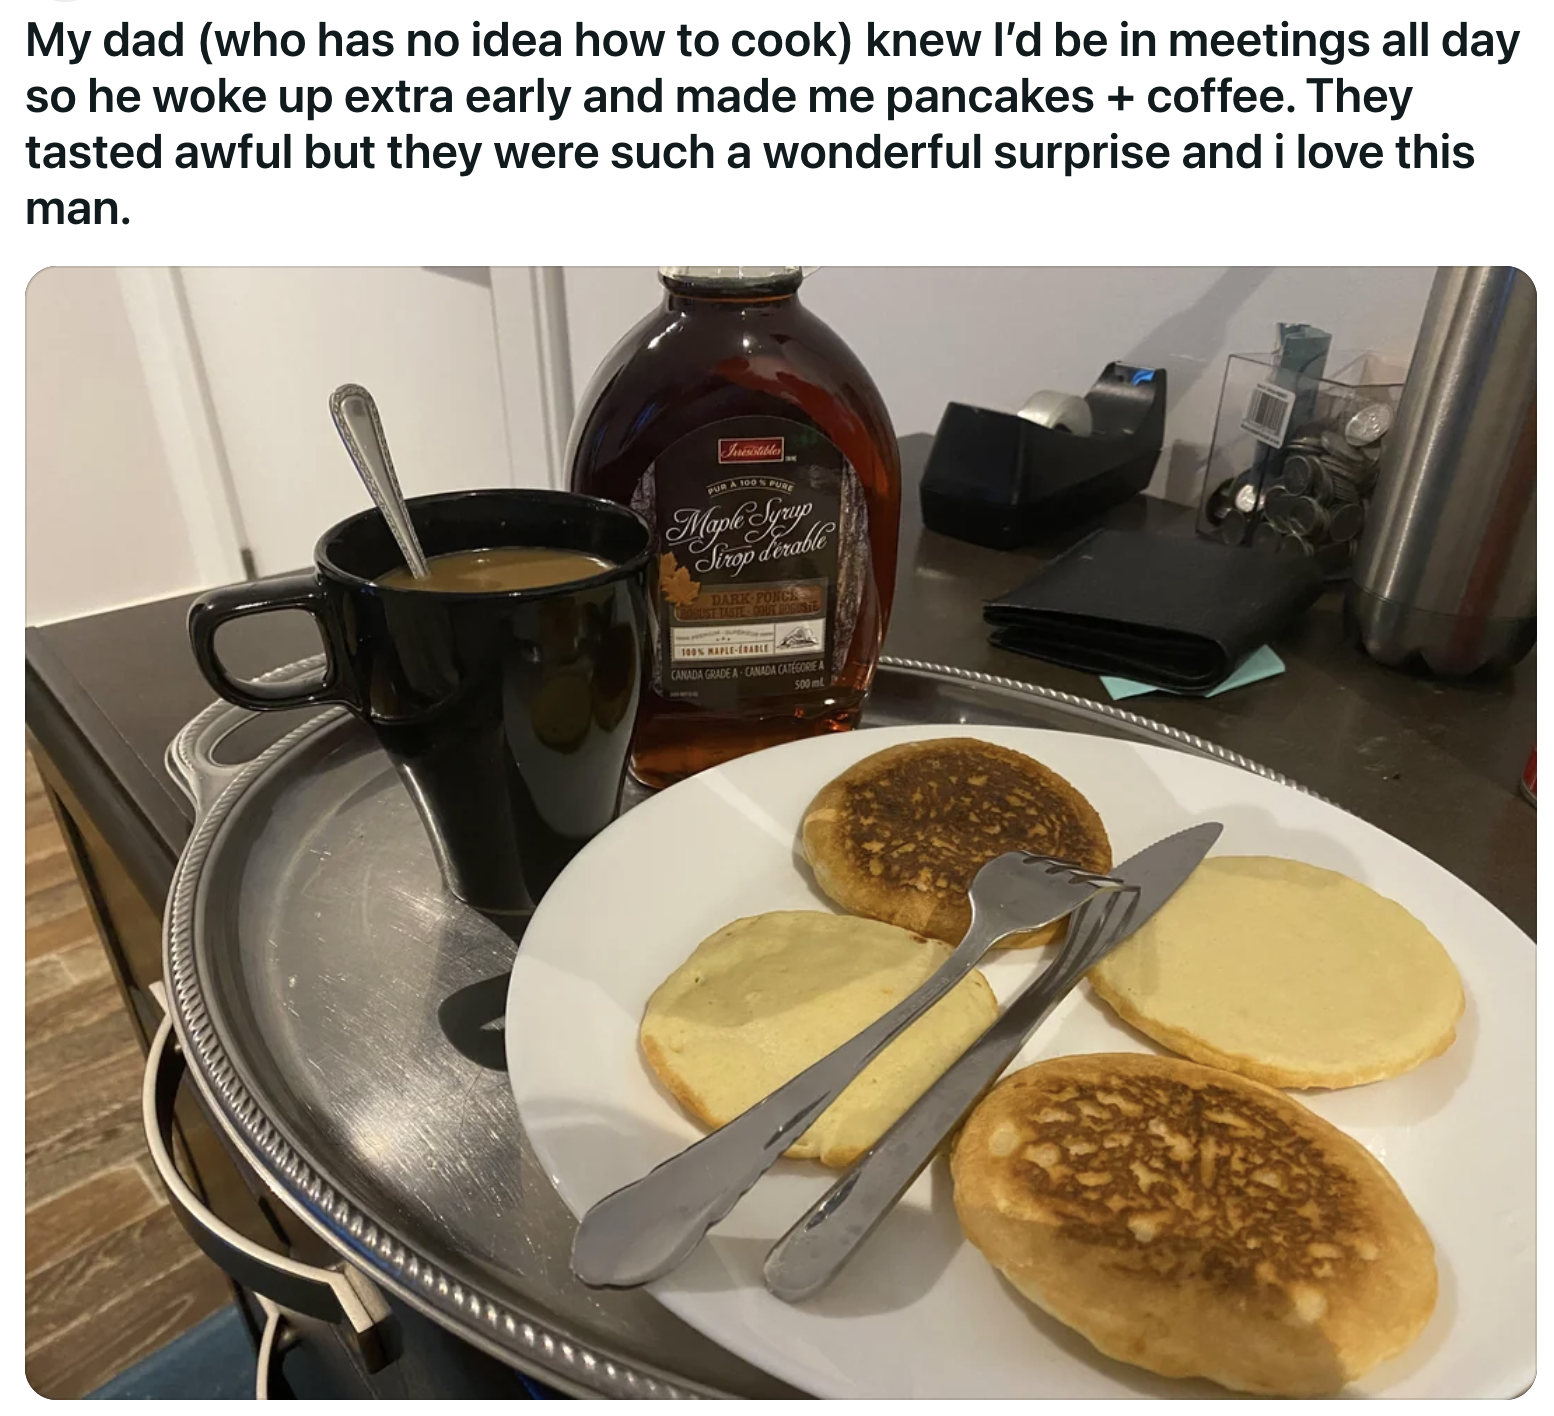 Heartwarming photo of homemade pancakes and coffee, a thoughtful gesture from a father